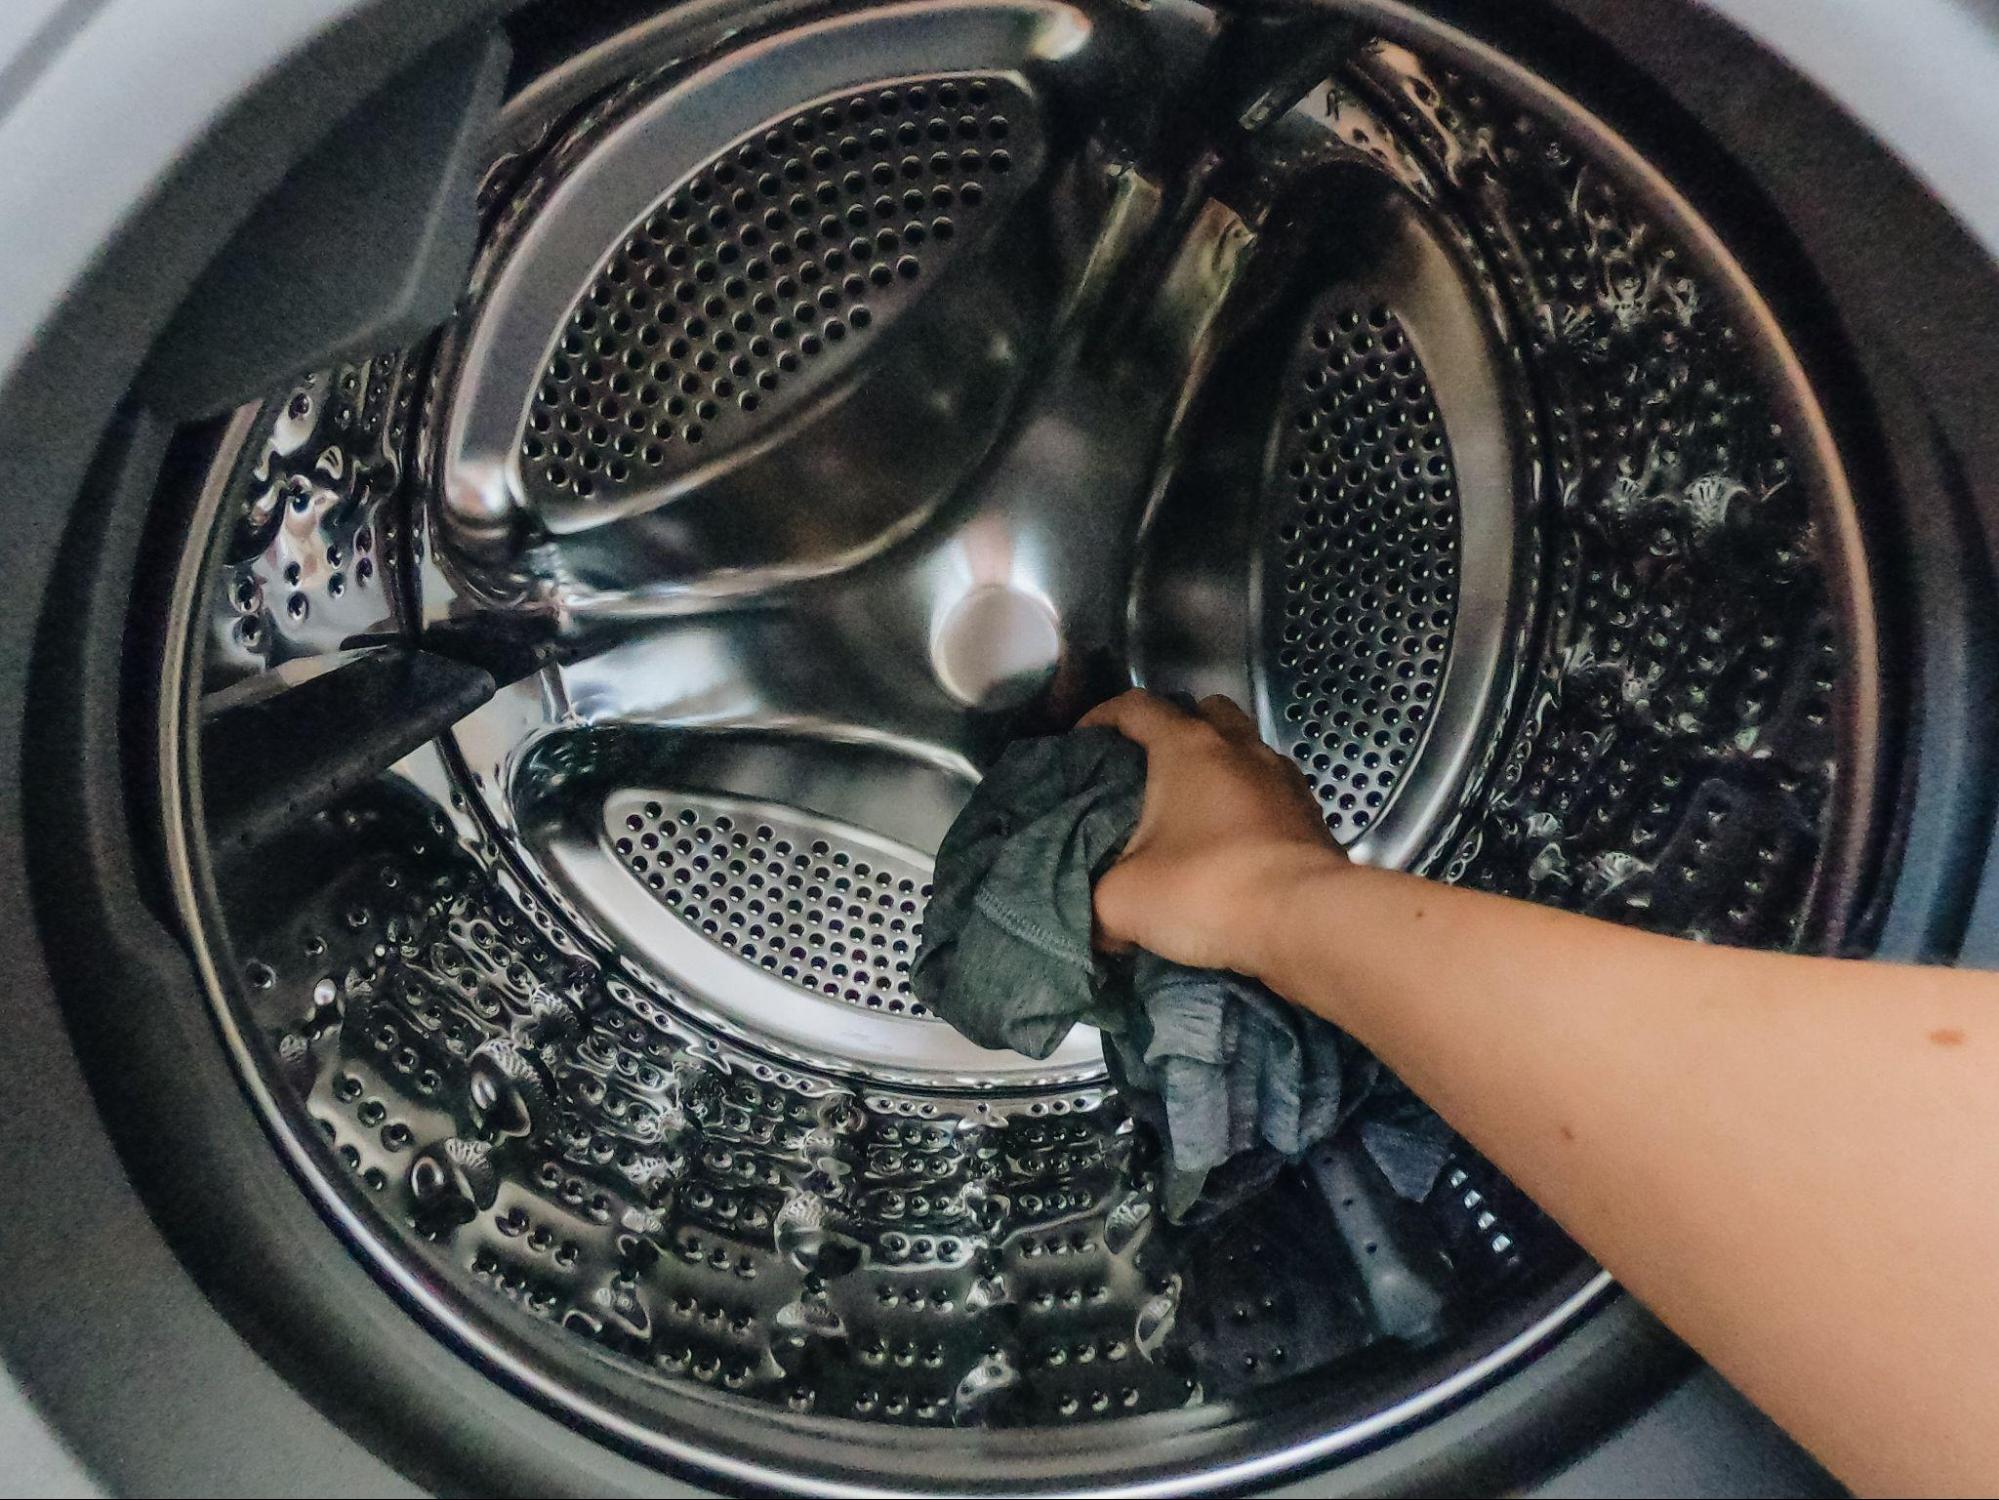 6 Maintenance Tips For Your Washing Machine